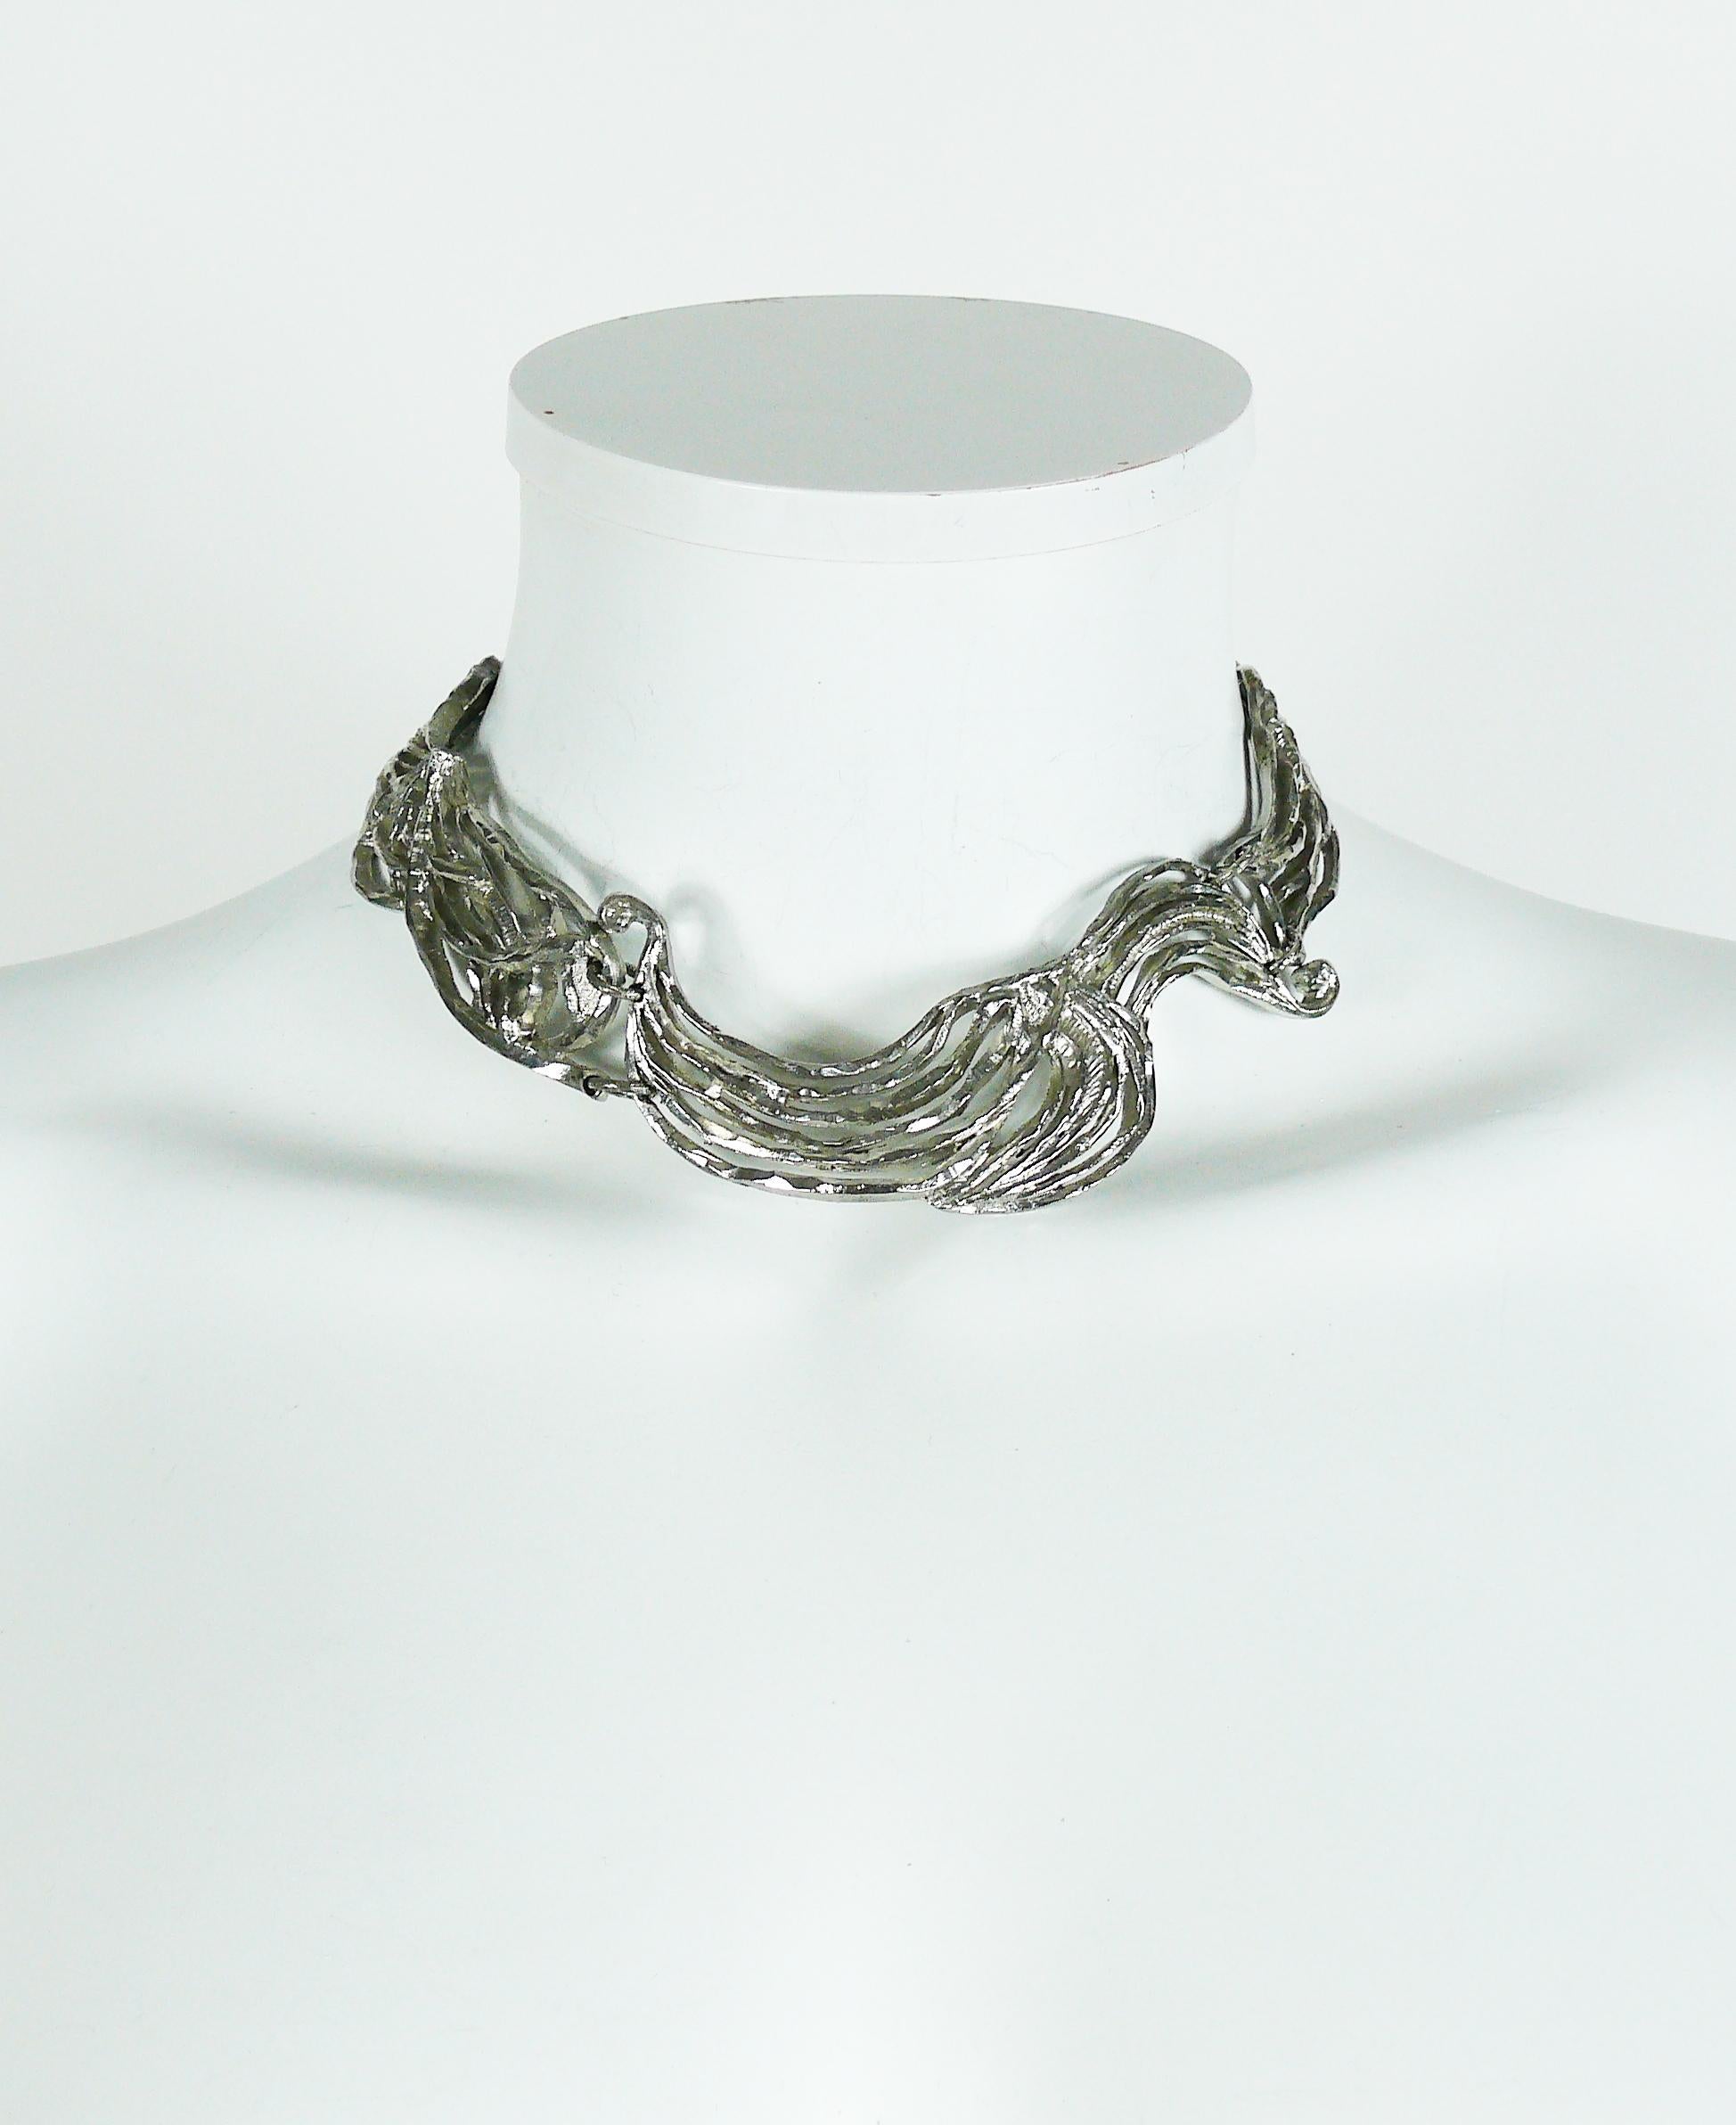 CHRISTIAN LACROIX silver toned collar necklace featuring a gorgeous openwork design.

Hook clasp closure.
Extension chain.

Marked CHRISTIAN LACROIX CL Made in France.

Indicative measurements : max. circumference approx. 36.13 cm (14.22 inches) /